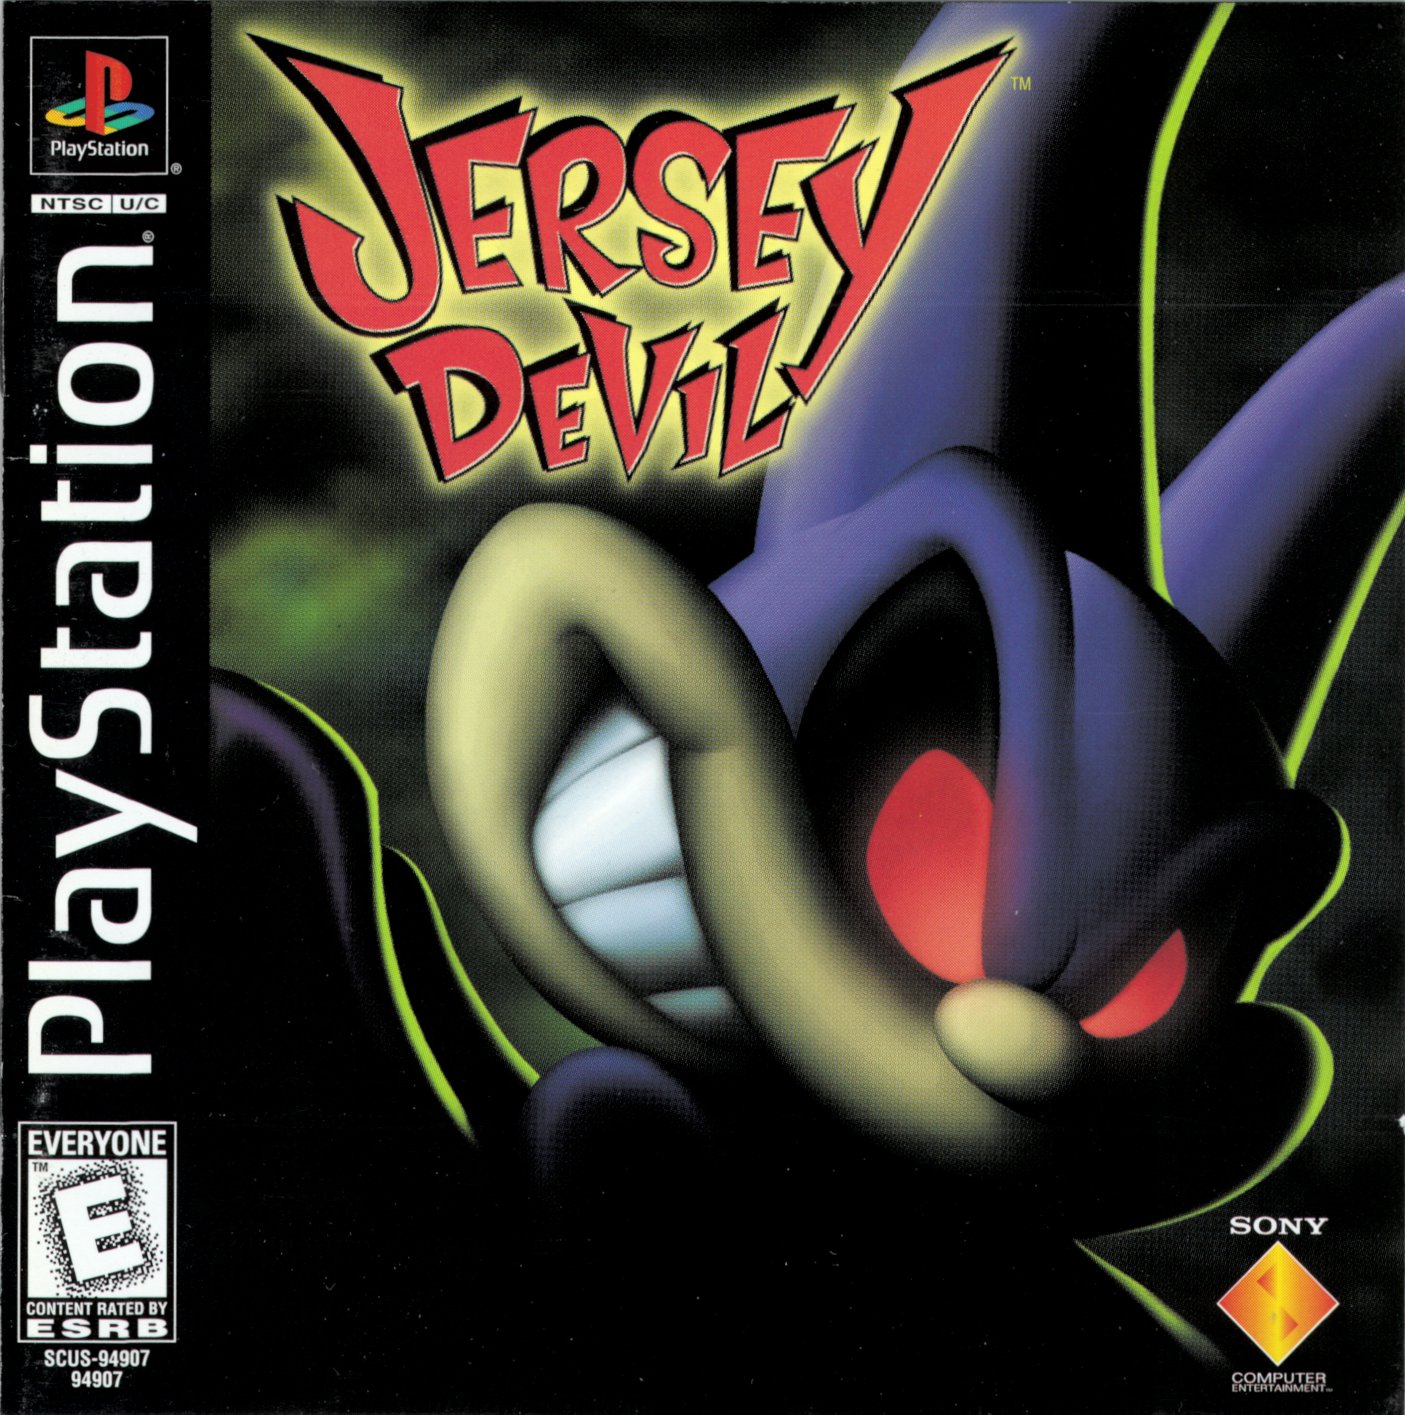 Jersey Devil screenshots, images and pictures - Giant Bomb